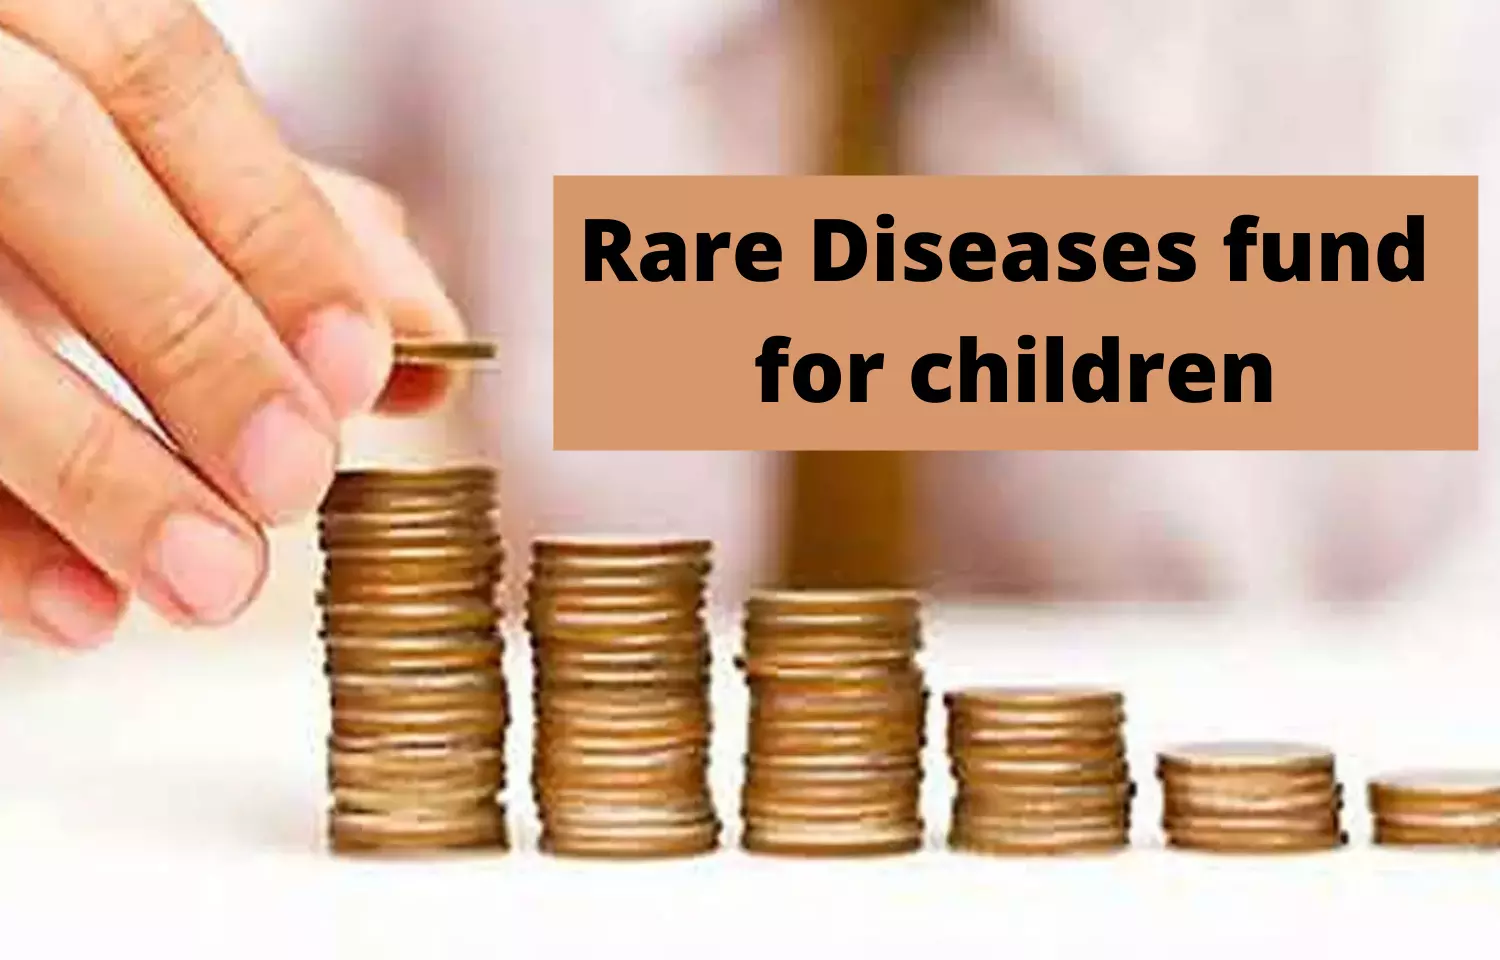 Ensure funds for treatment of kids with rare diseases: Delhi HC directs Centre